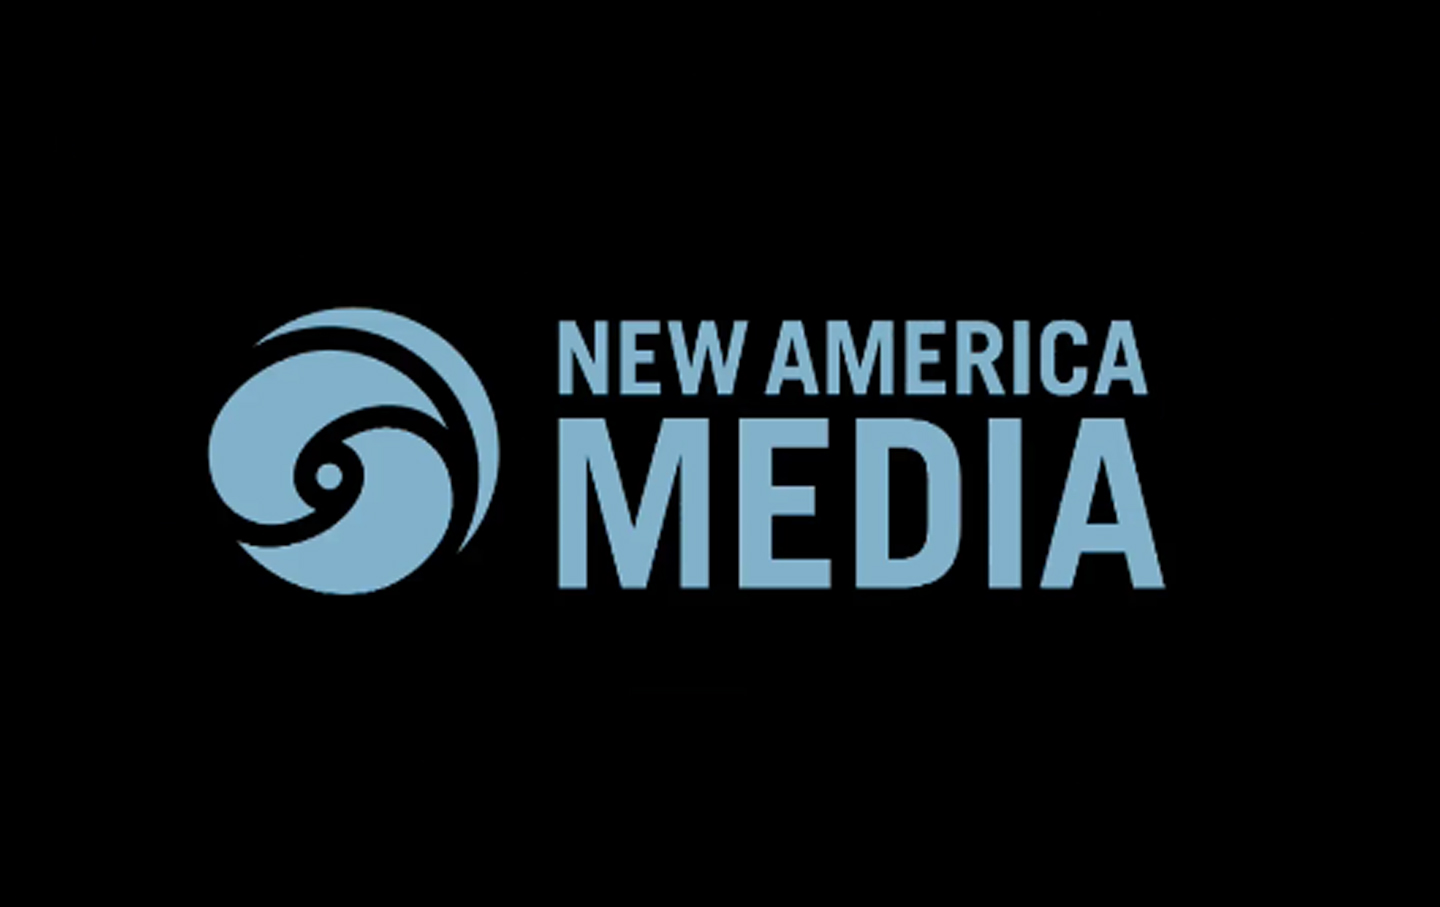 New America Media Is Closing—and That’s Bad News for All American Media